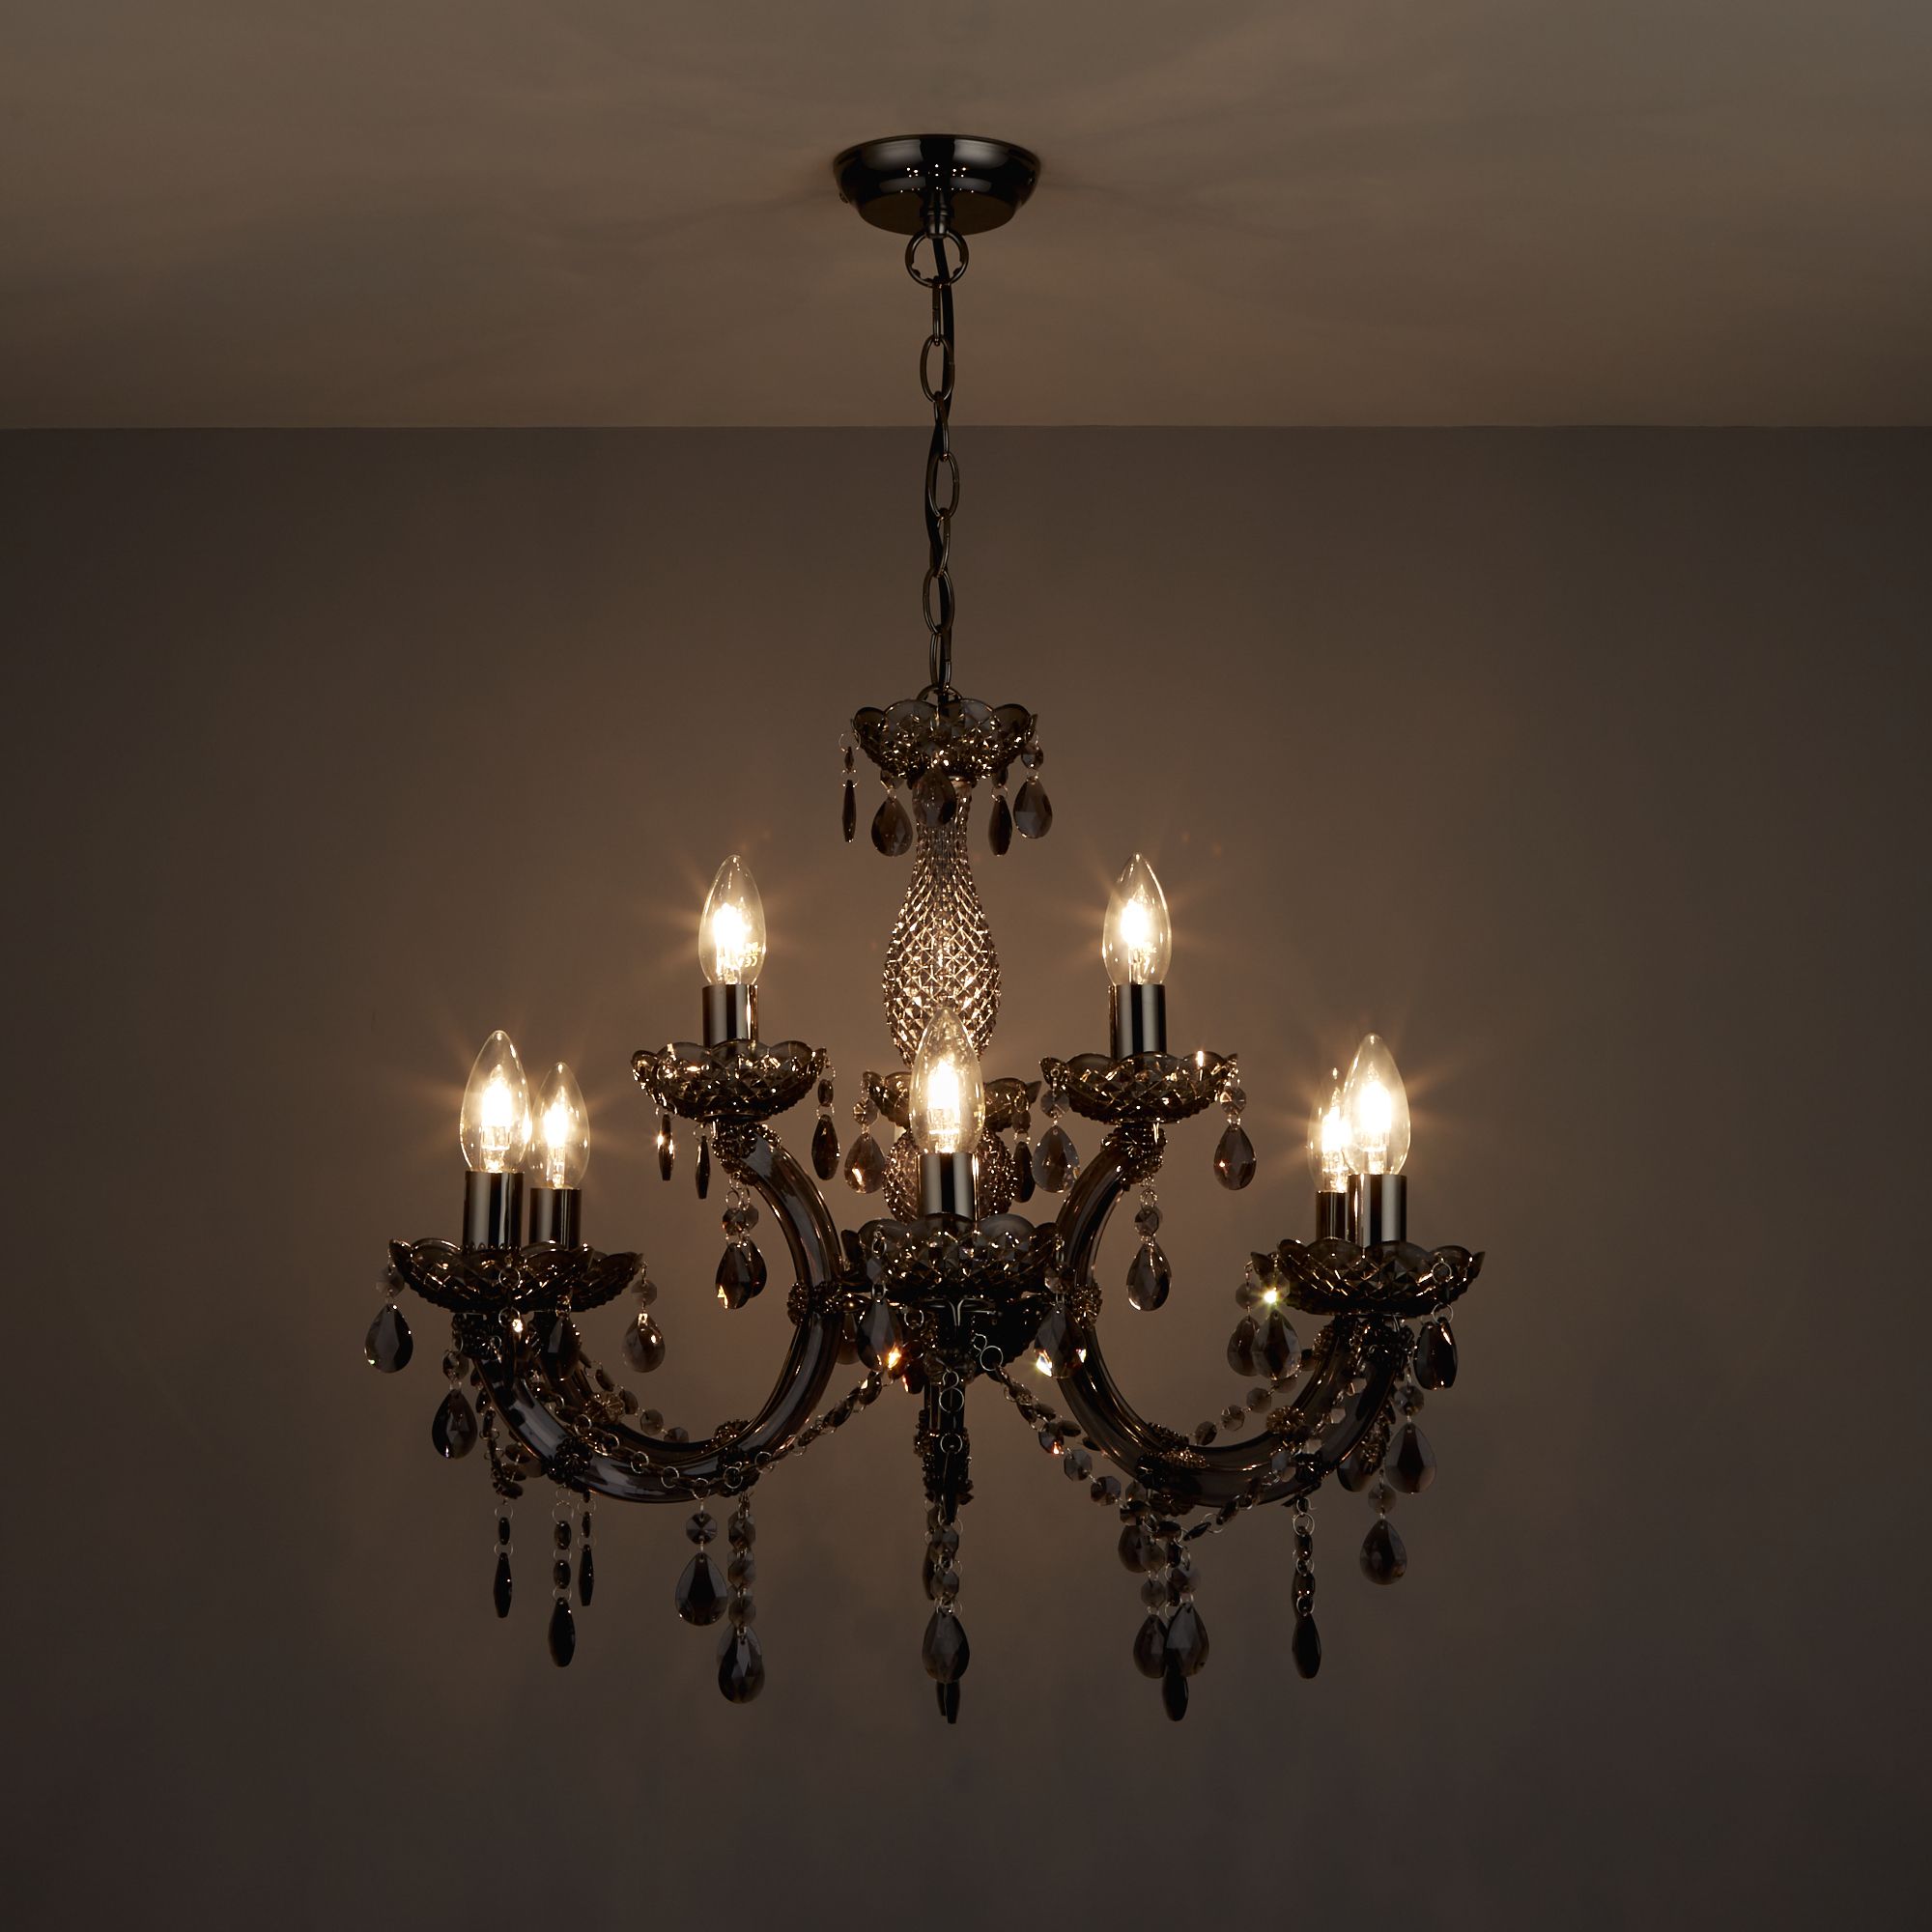 Annelise Chandelier Smoked effect 9 Lamp Ceiling light | DIY at B&Q